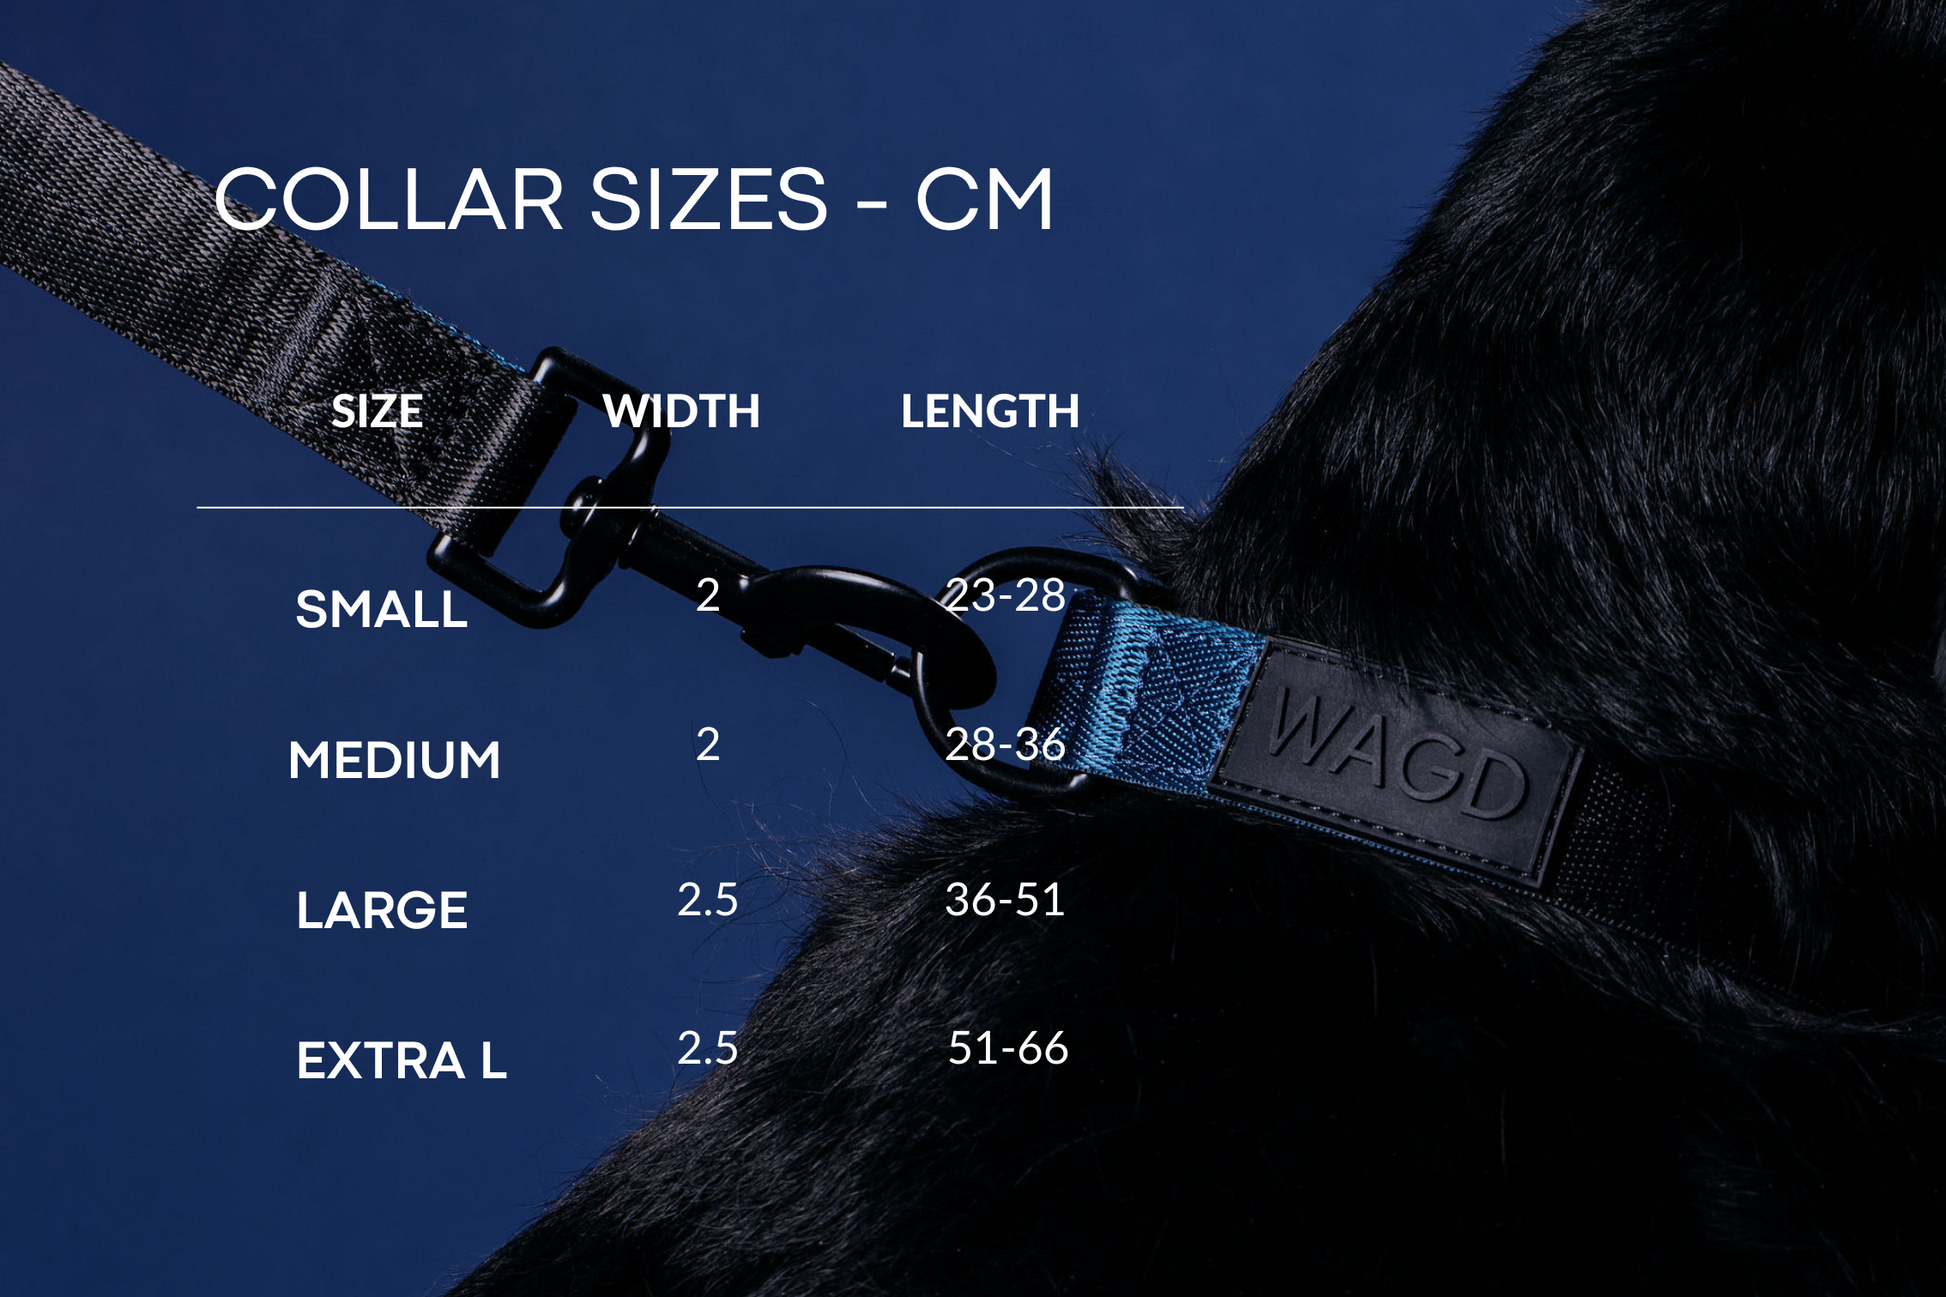 Collar sizing chart, small 25 to 28cm, medium 28 to 36cm, large 36 to 51cm and Extra L 51 to 66cm. Background shows a black dogs neck with a collar on.